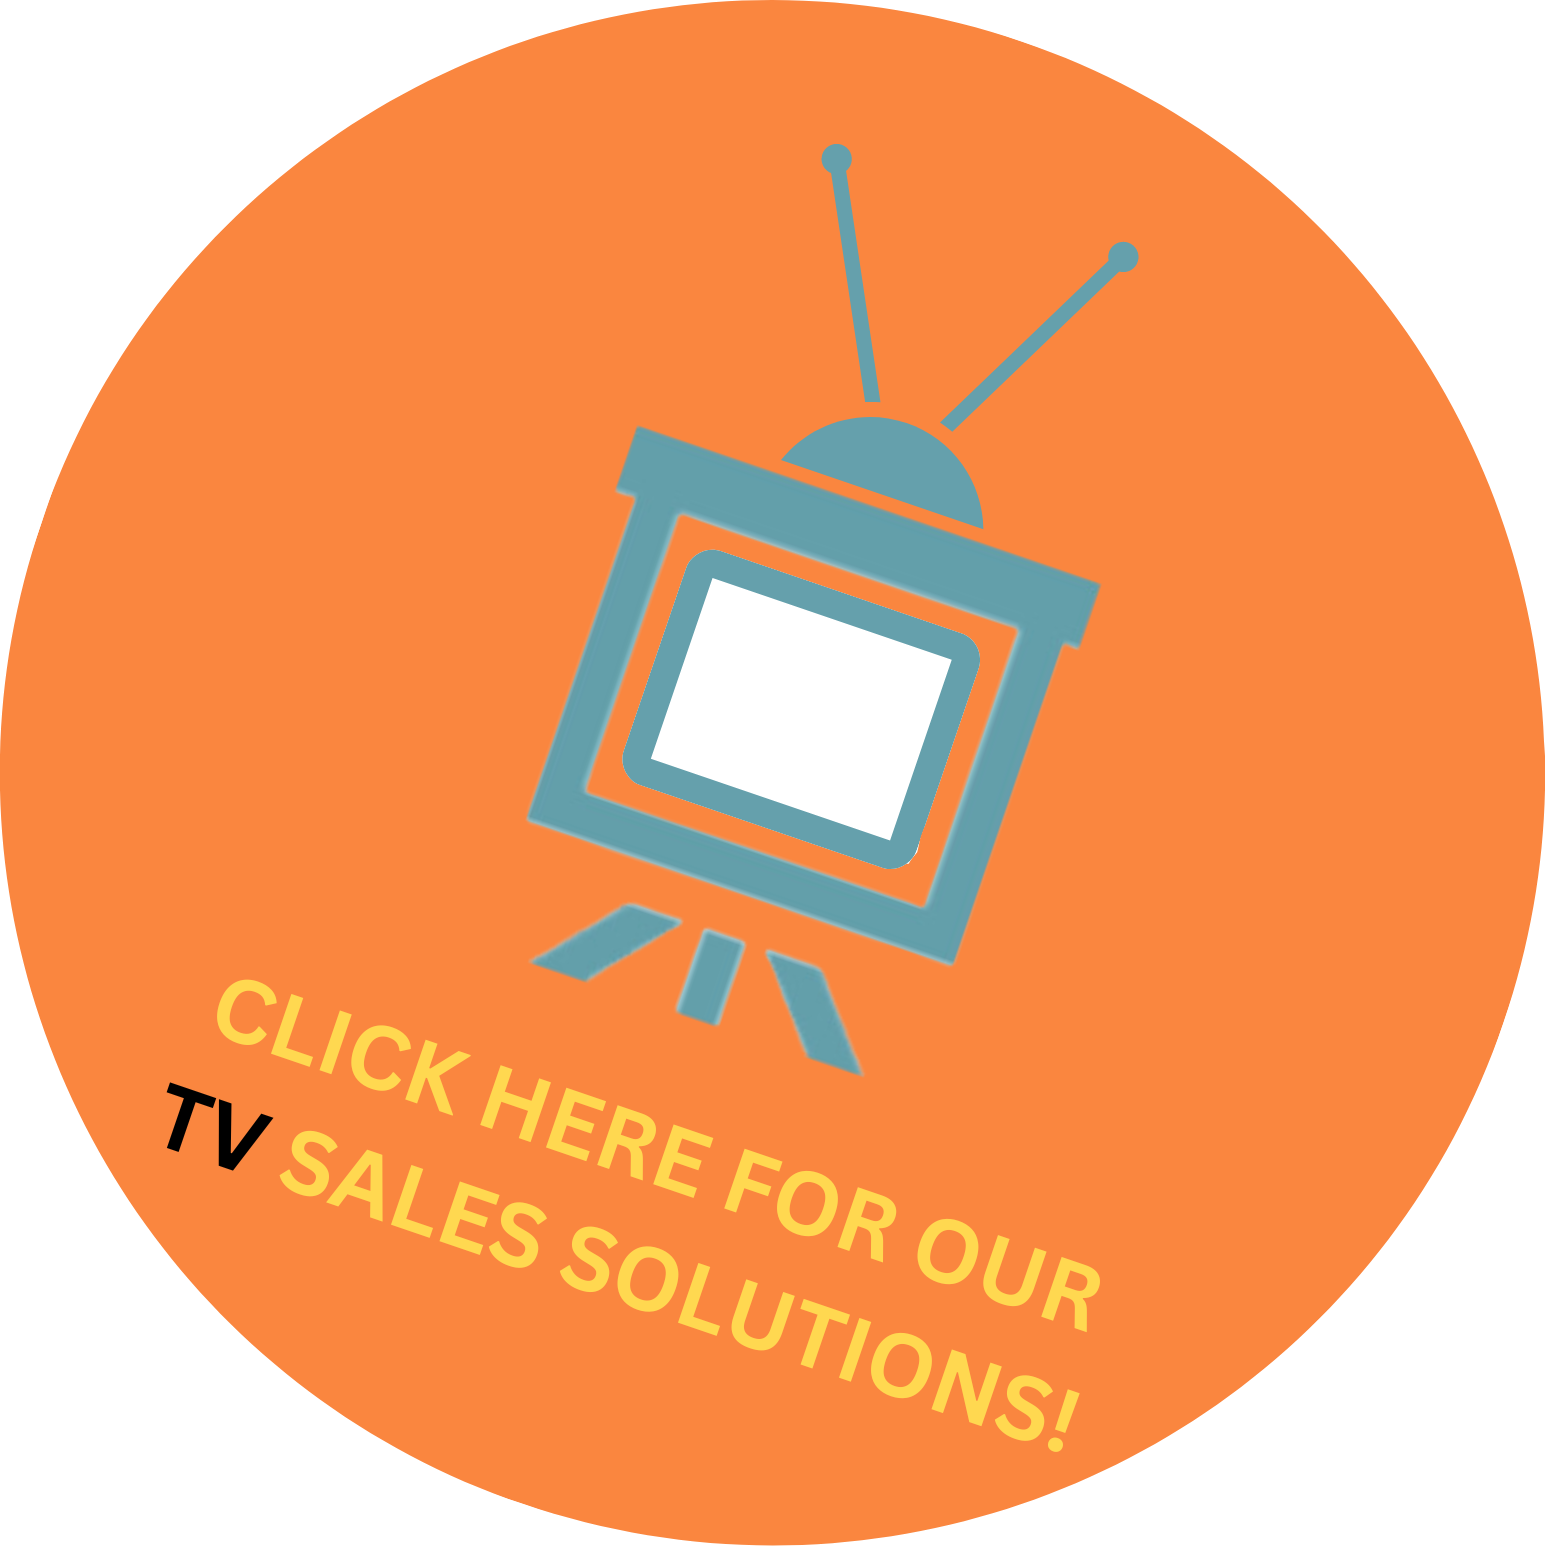 Check out our TV Sales Solutions Services